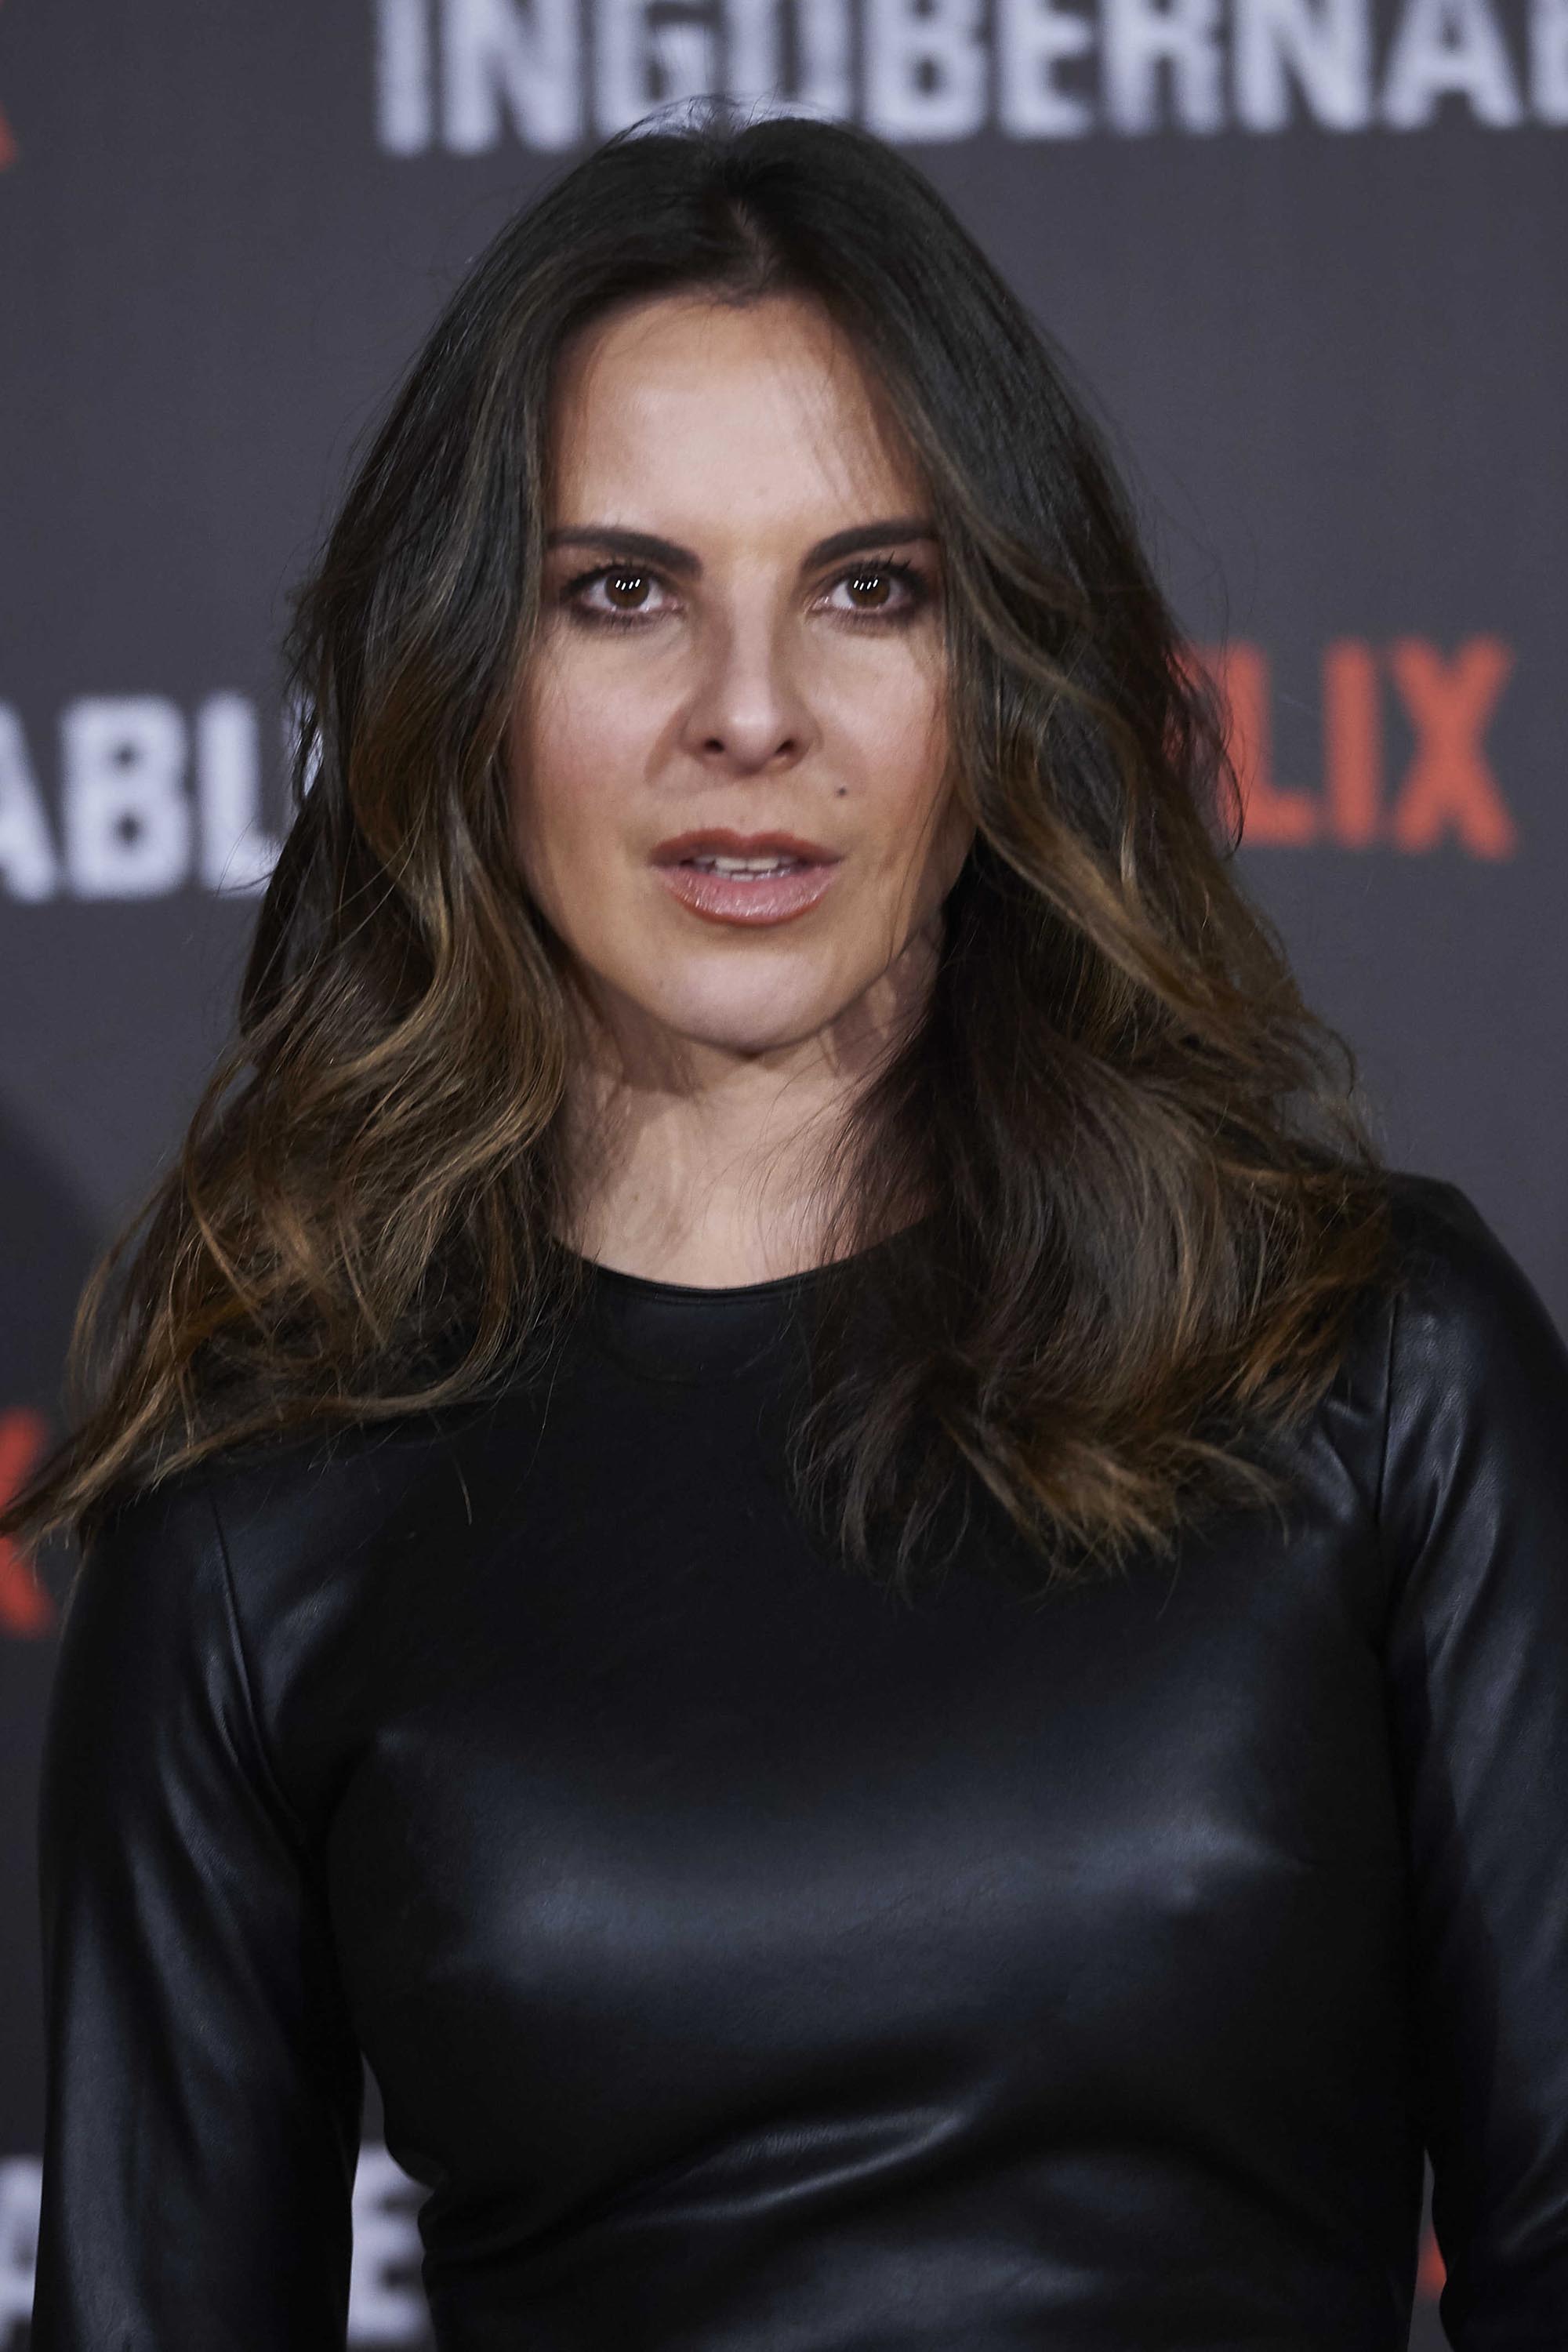 Kate del Castillo attends a photocall for Netflix’s ‘Ingobernable’